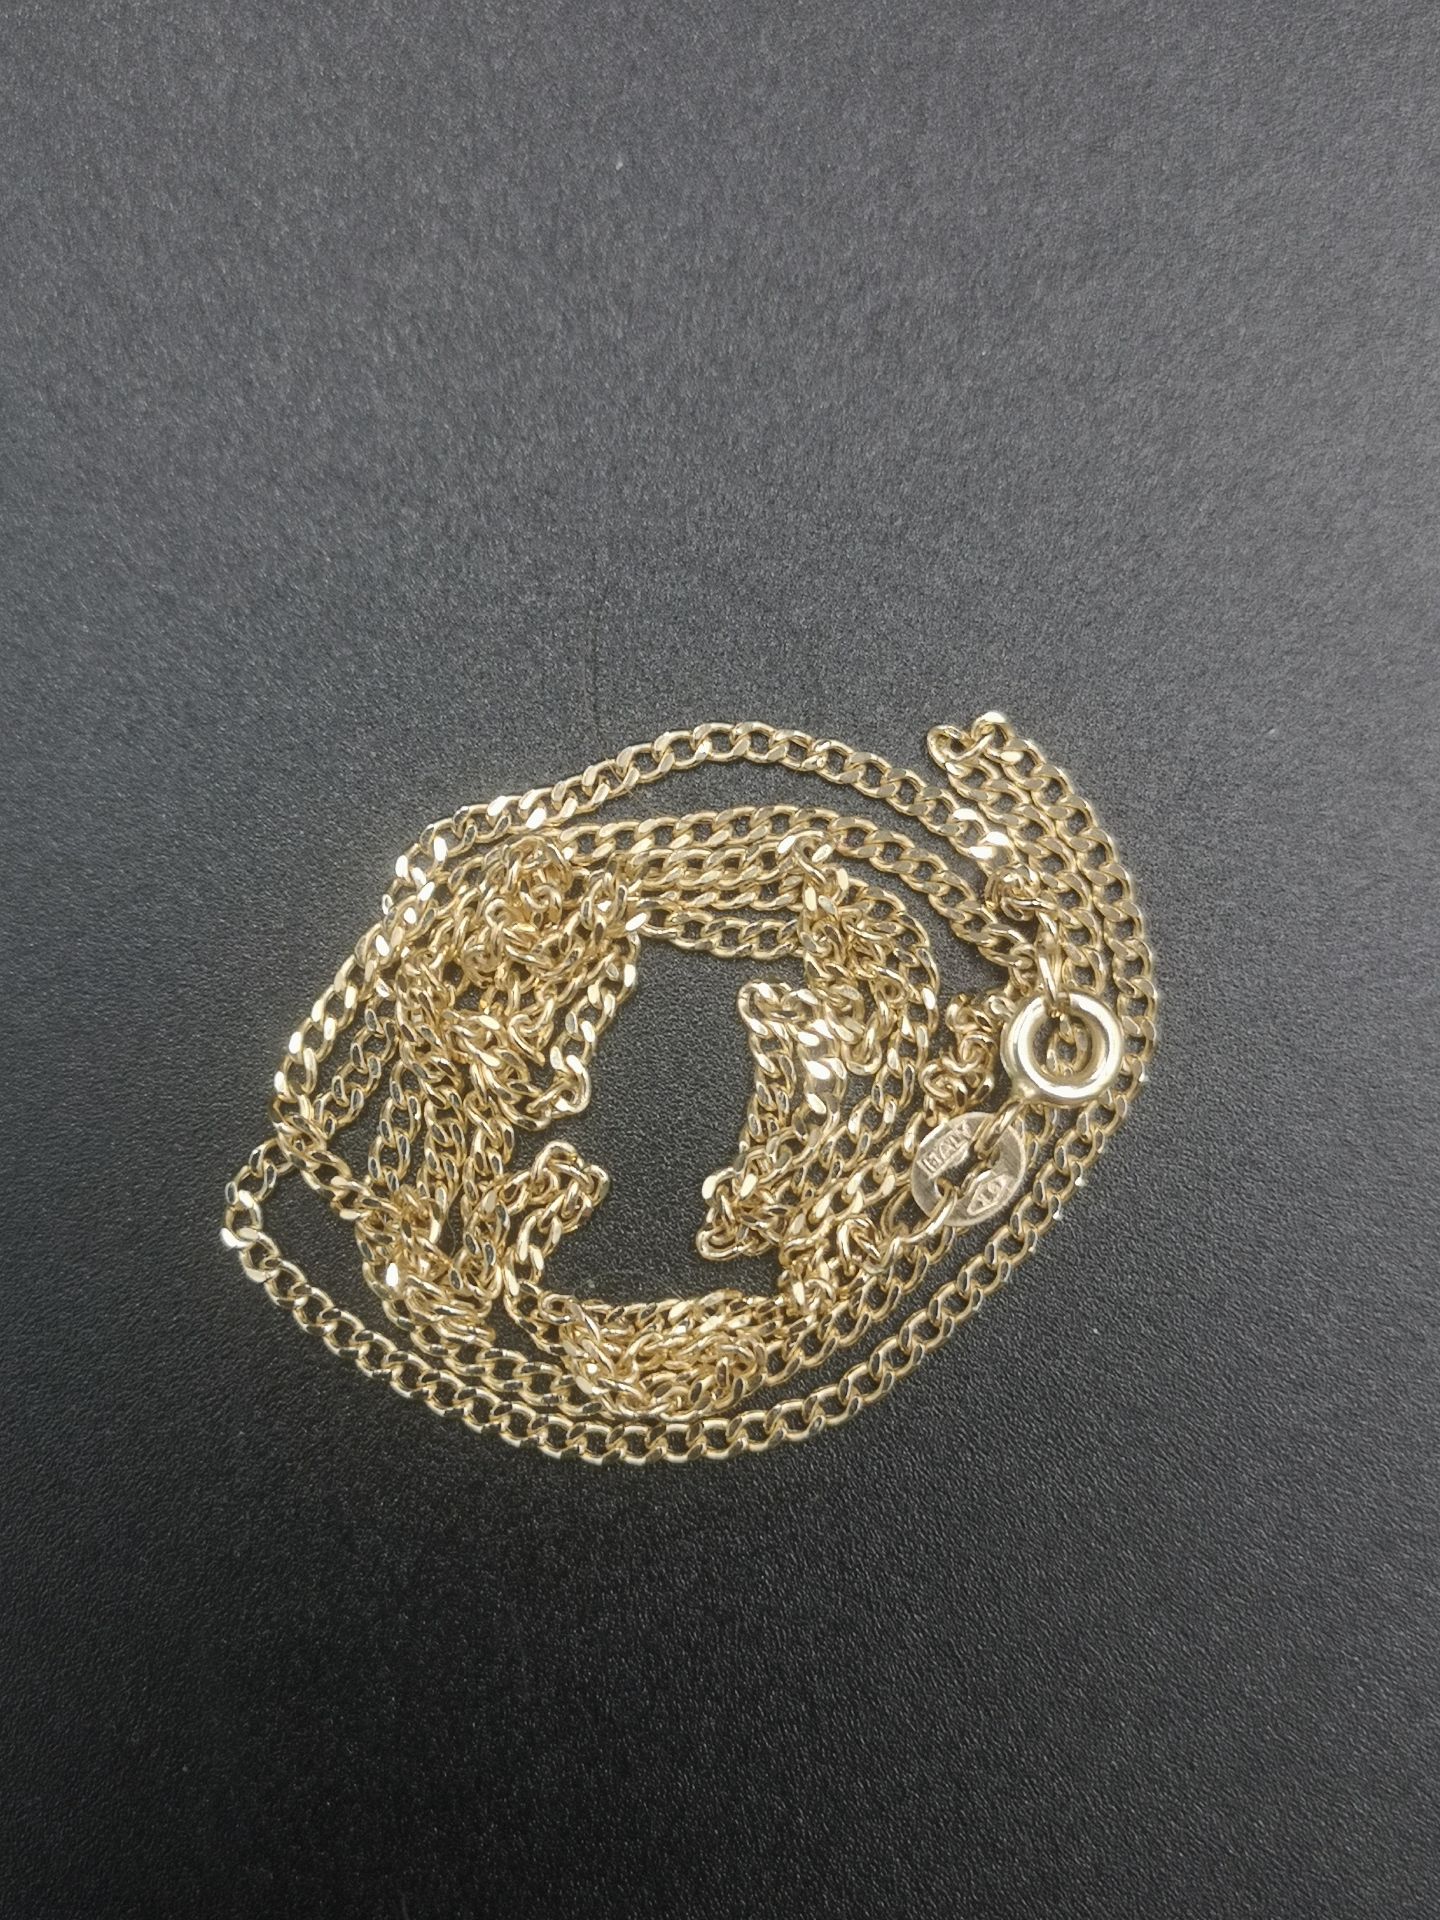 9ct gold chain - Image 3 of 4